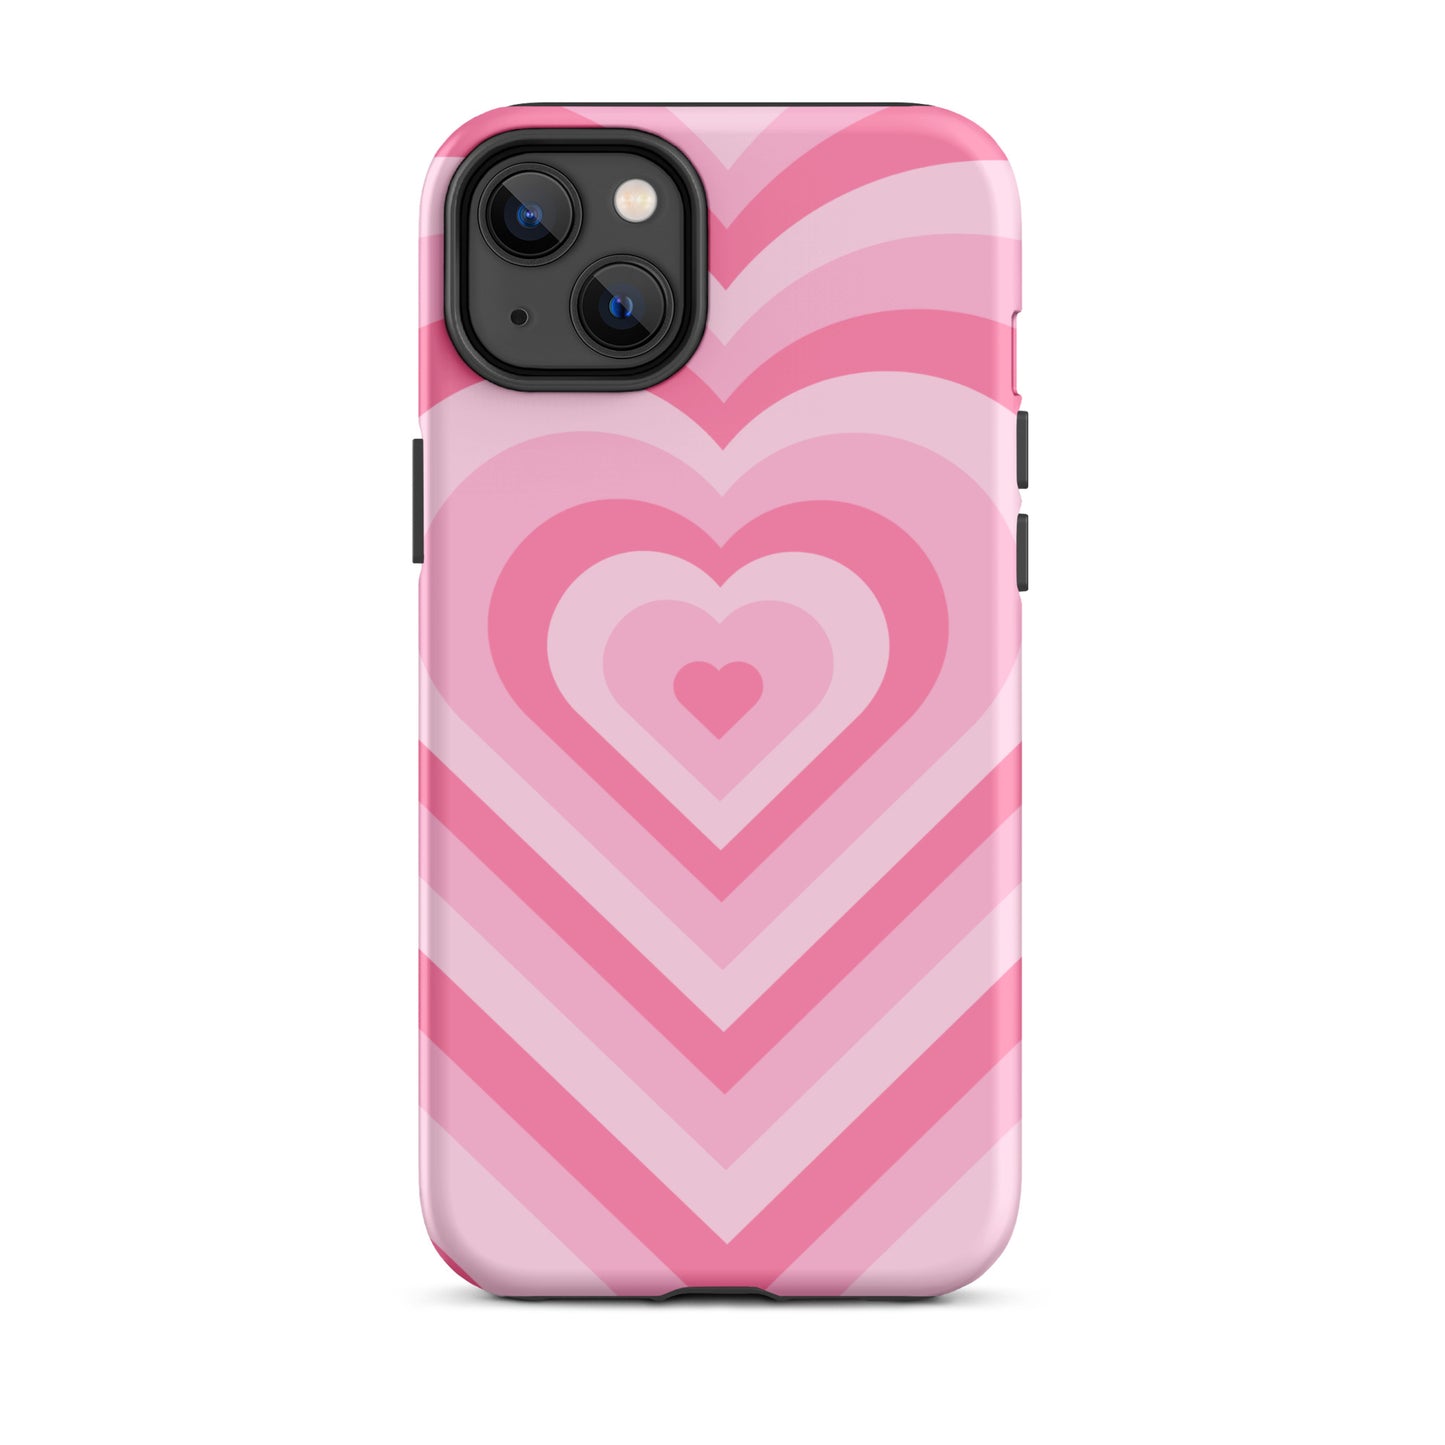 Pink Glowing Hearts iPhone Case